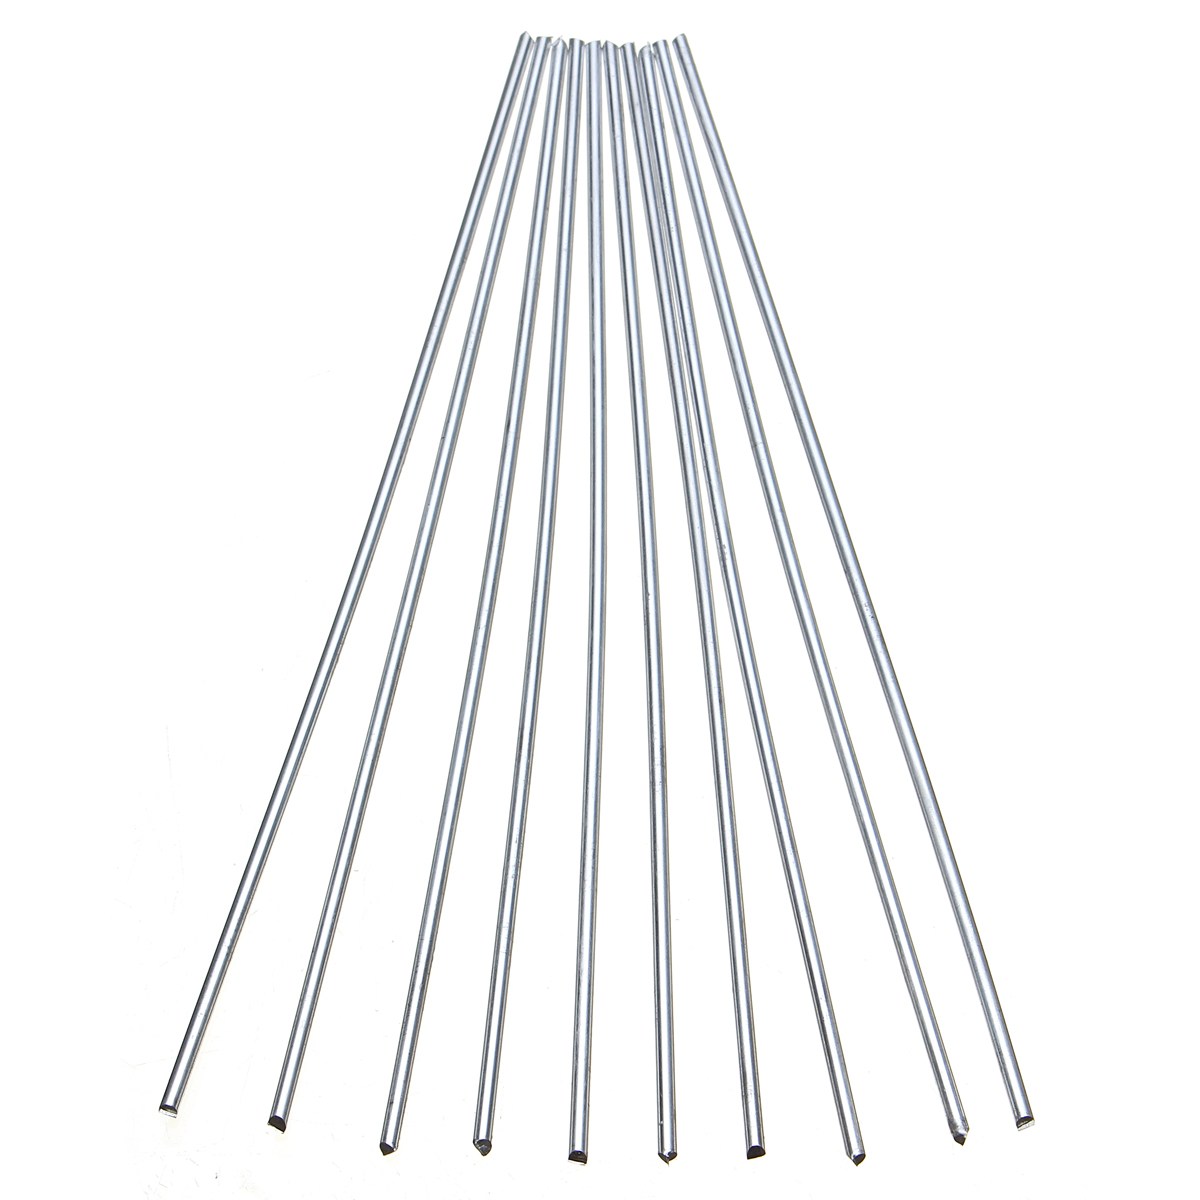 10pcs Low Temperature Easy Melt Aluminum Welding Rods Weld Bars Cored Wire 3.2mm Rod Solder for Soldering Machine